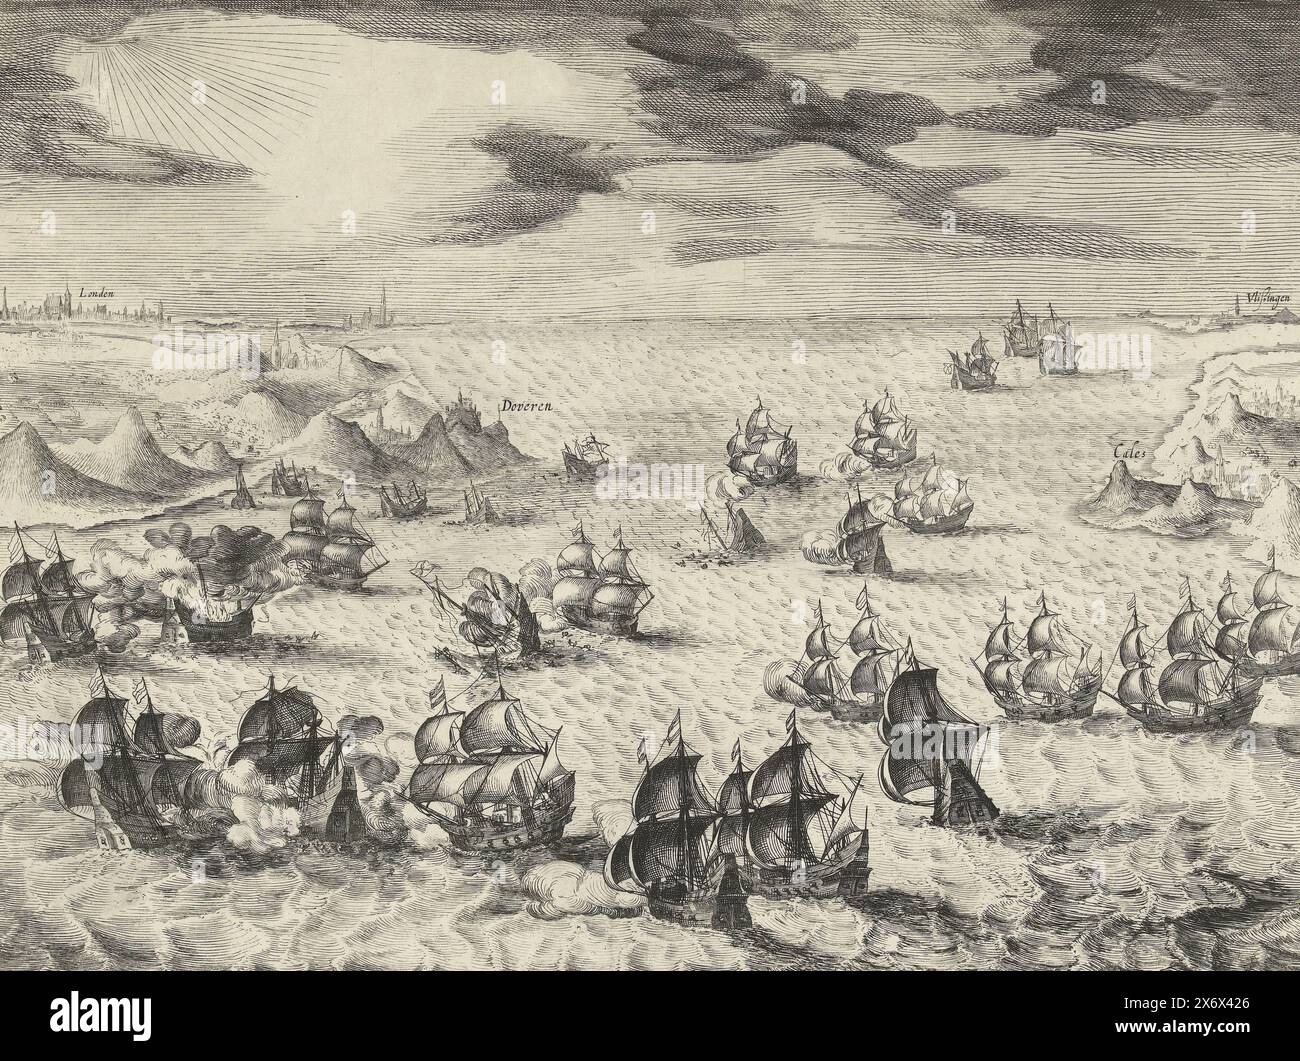 Sea battle between State and Spanish ships in the Channel, 1605, Sea battle between State and Spanish ships in the Channel off the English coast near Dover, June 12-13, 1605. On the left the English coast with Dover and London in the distance, on the right the French coast with Calais and Vlissingen in the distance. The Dutch fleet under Lieutenant Admiral Willem de Zoete, lord of Haultain, intercepts a Spanish troop transport to Flanders in English and German ships, sinks some of these ships and pursues others into English territorial waters, within gun range in the English castle at Dover Stock Photo